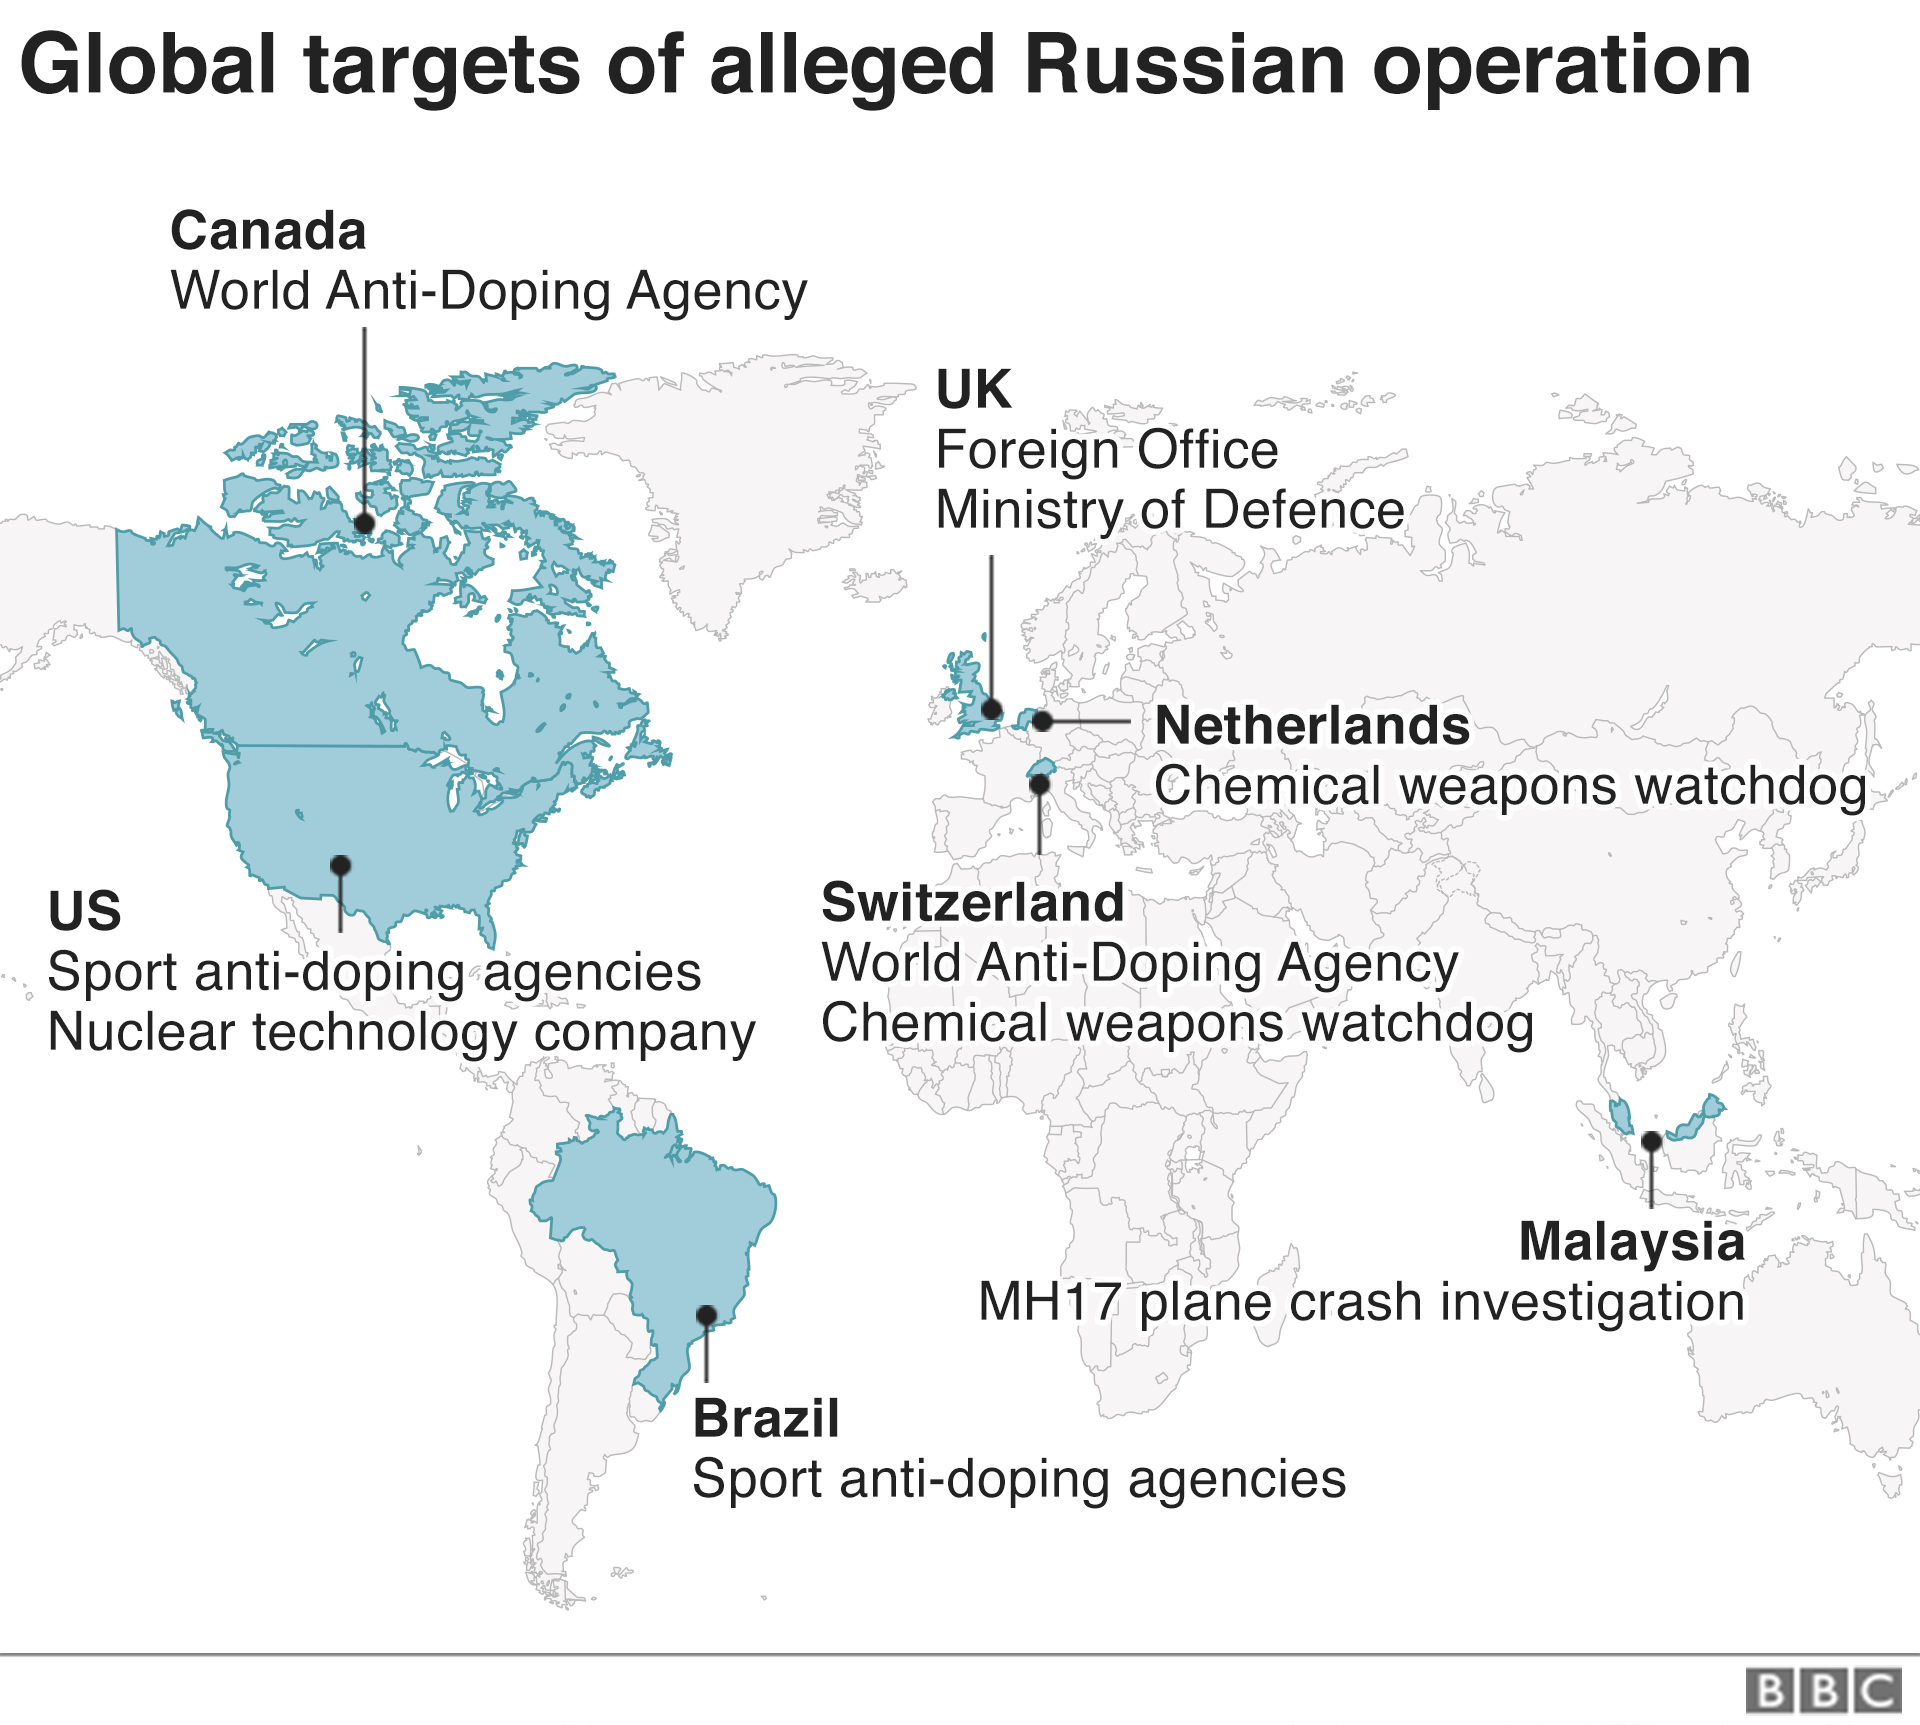 A map showing the alleged targets of the Russian cyber plots around the world